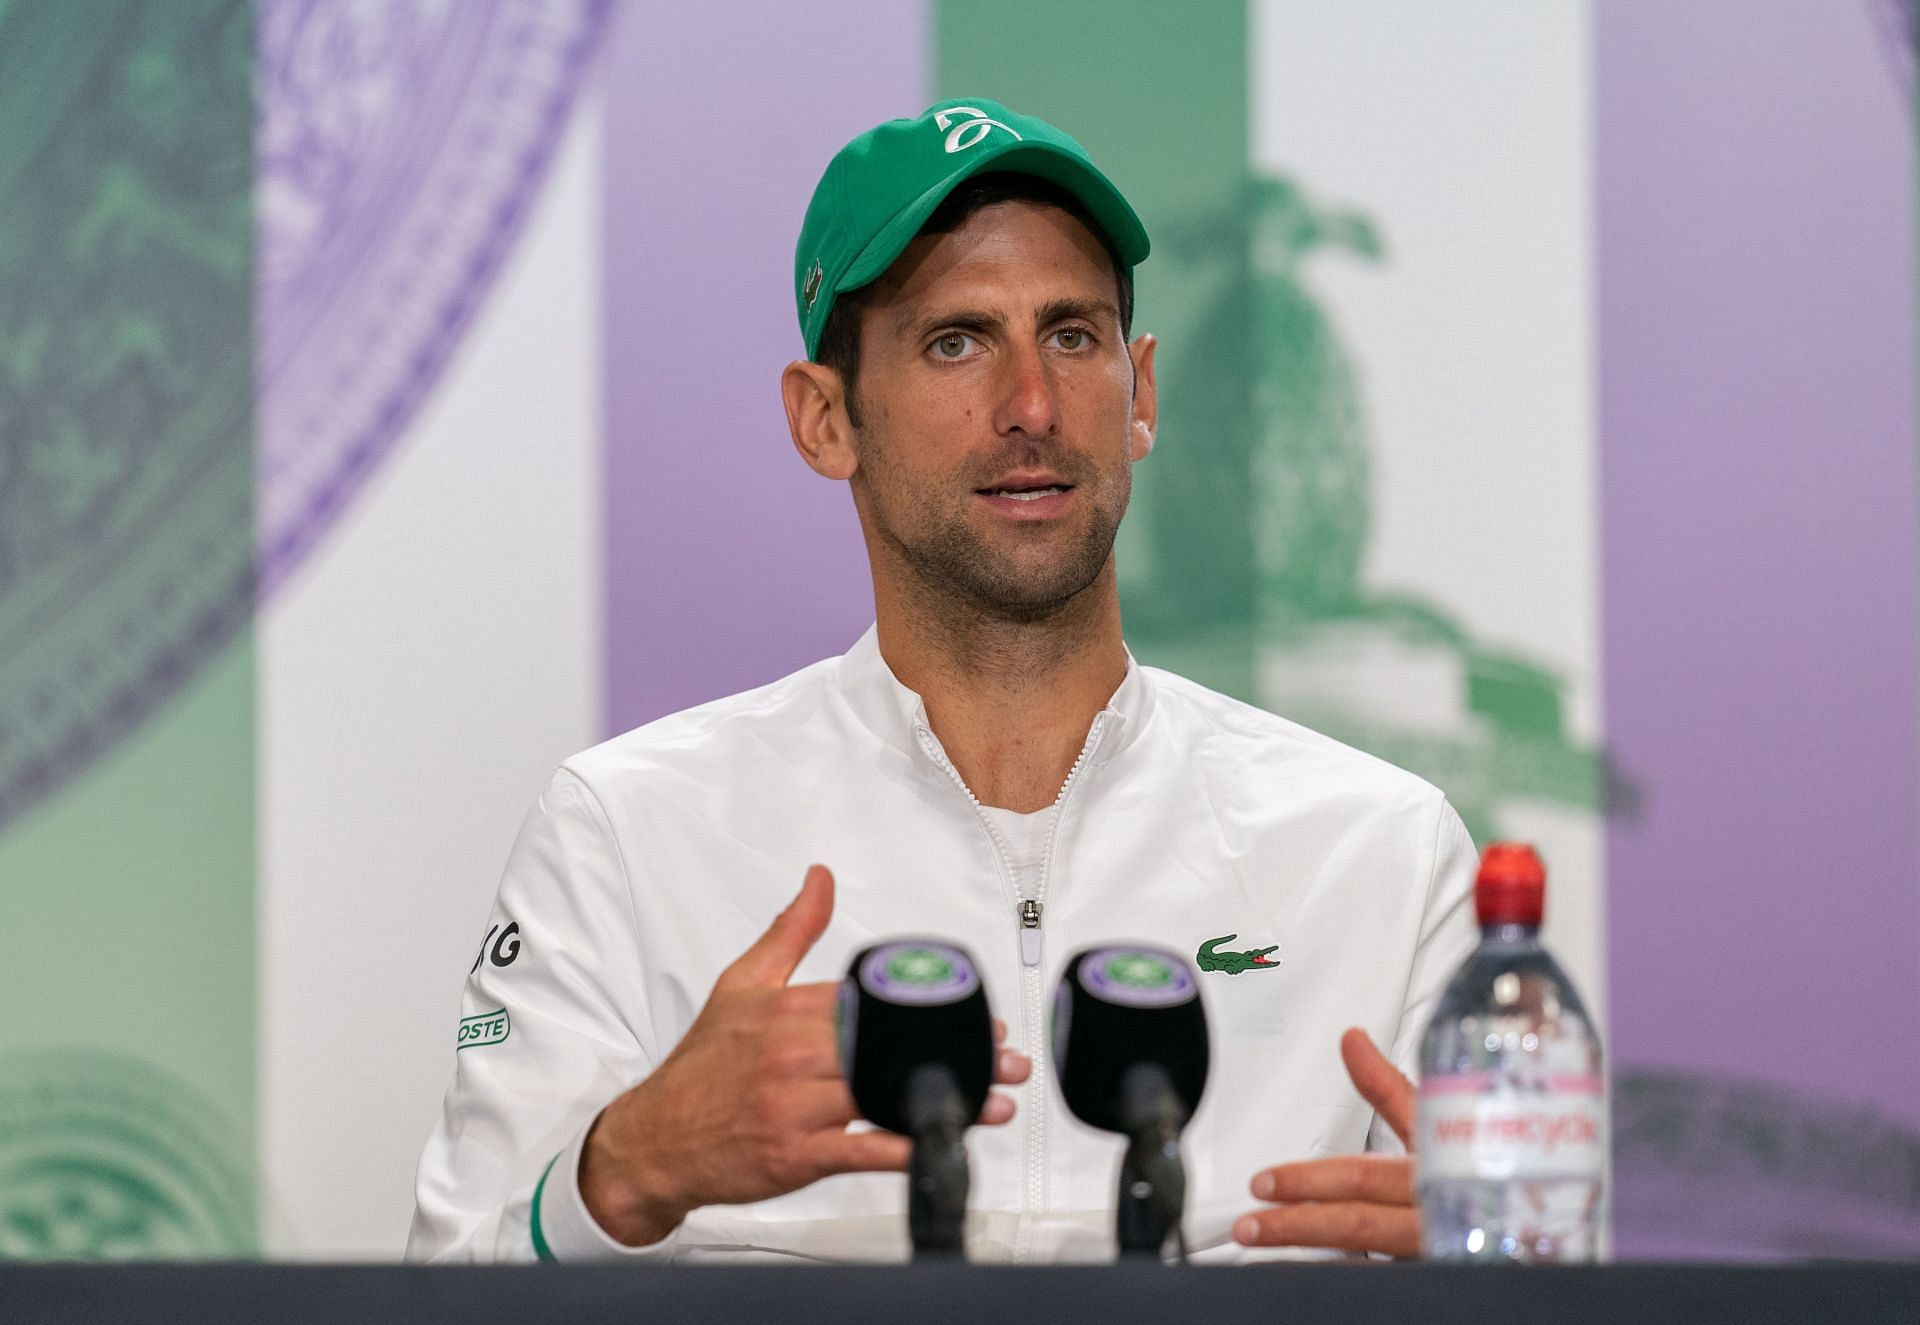 Novak speaking at a press conference at Wimbledon.